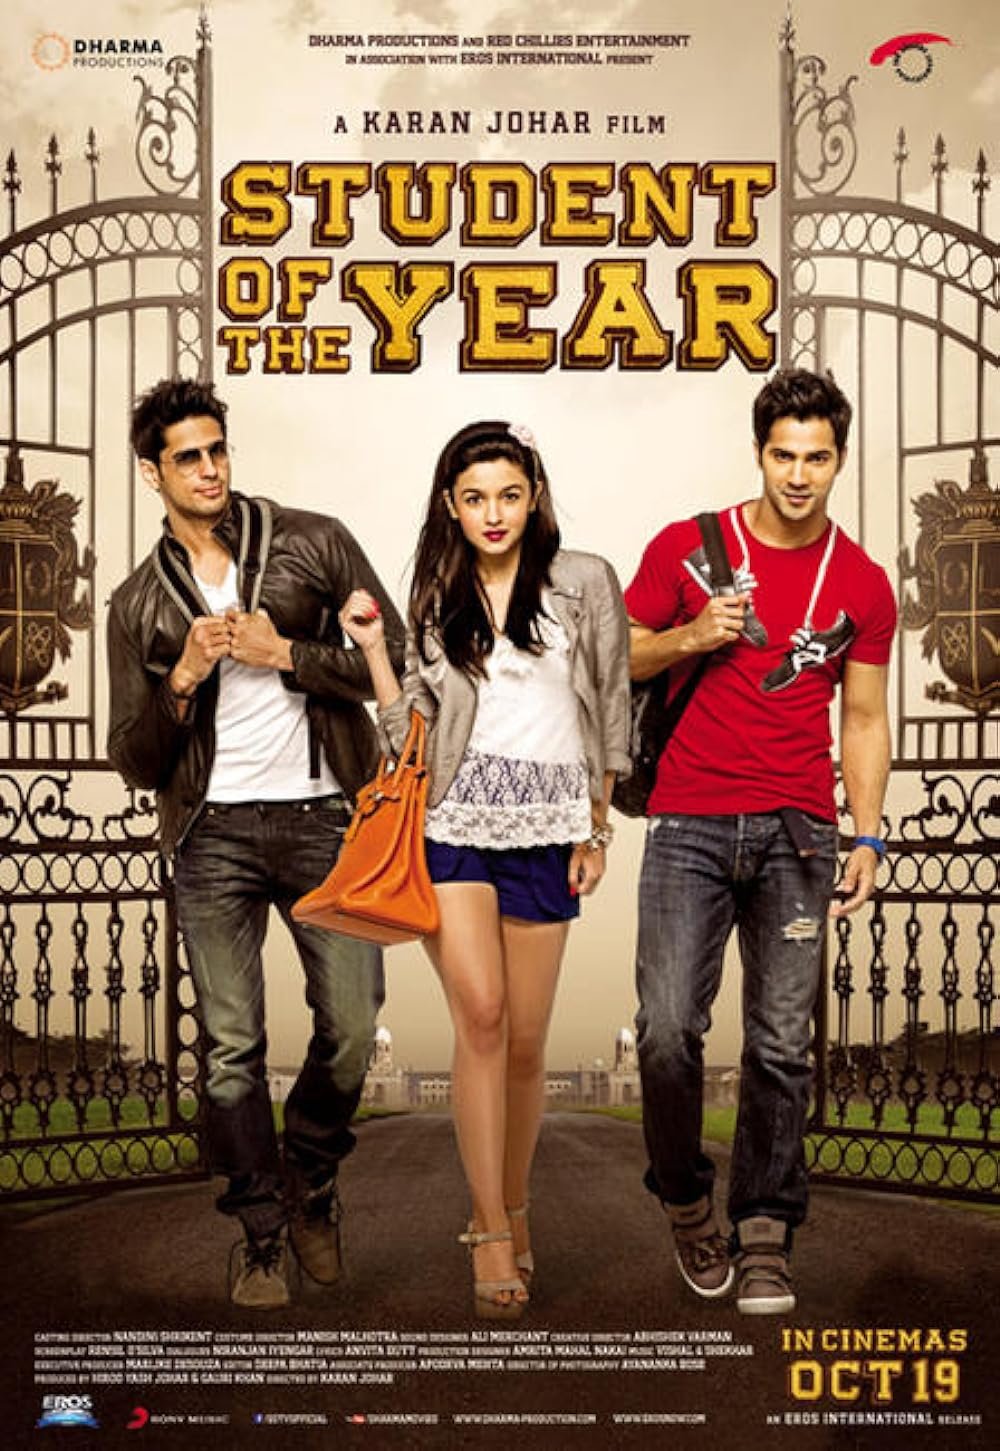 Download Student of the year 2012 Full HD Movie